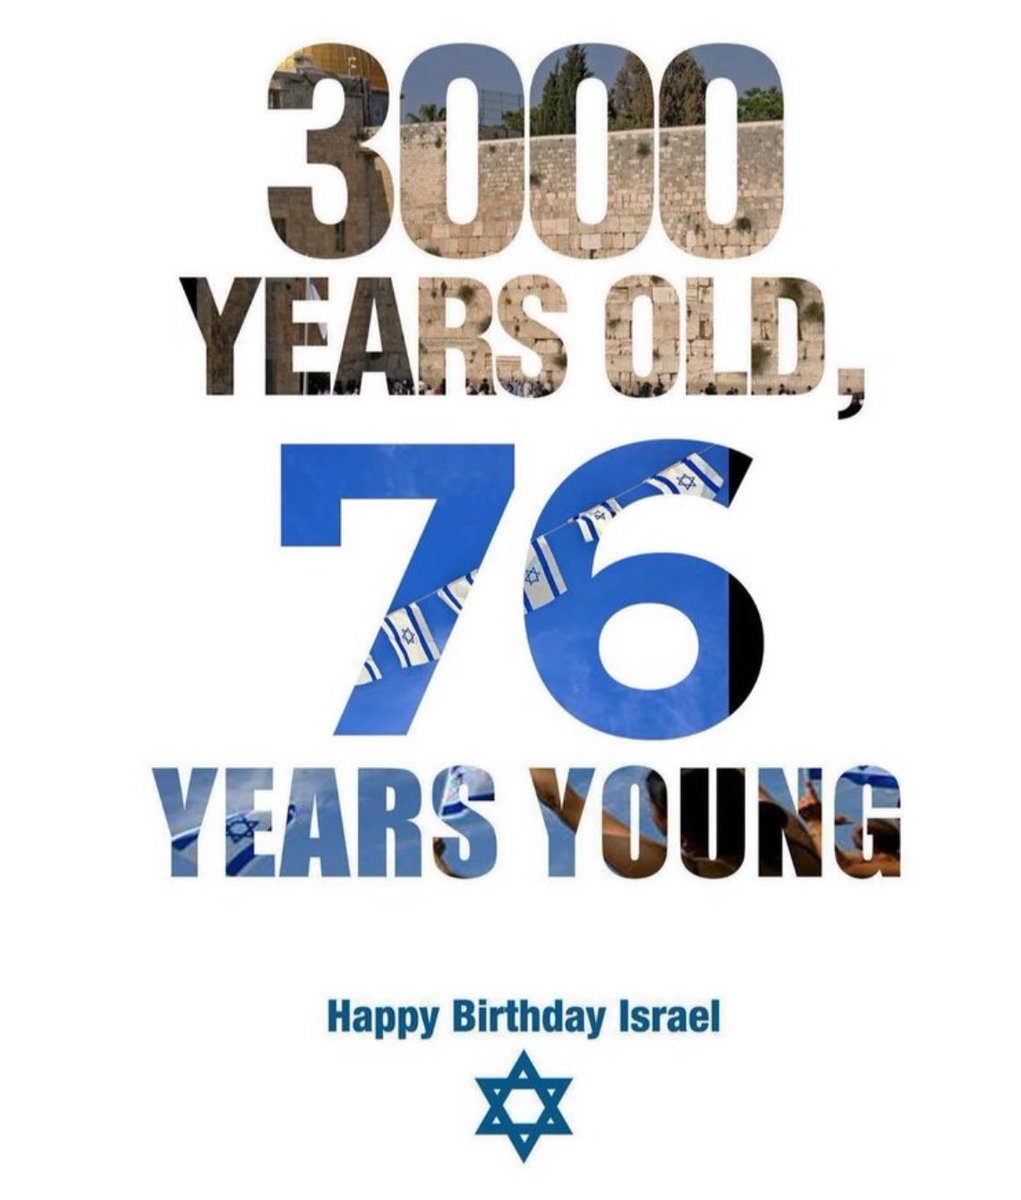 Israel, my beloved homeland, I wish for your prosperity and peace in the years to come. I love you with all my heart and being, and I will forever stand by your side. Happy Birthday. 🇮🇱